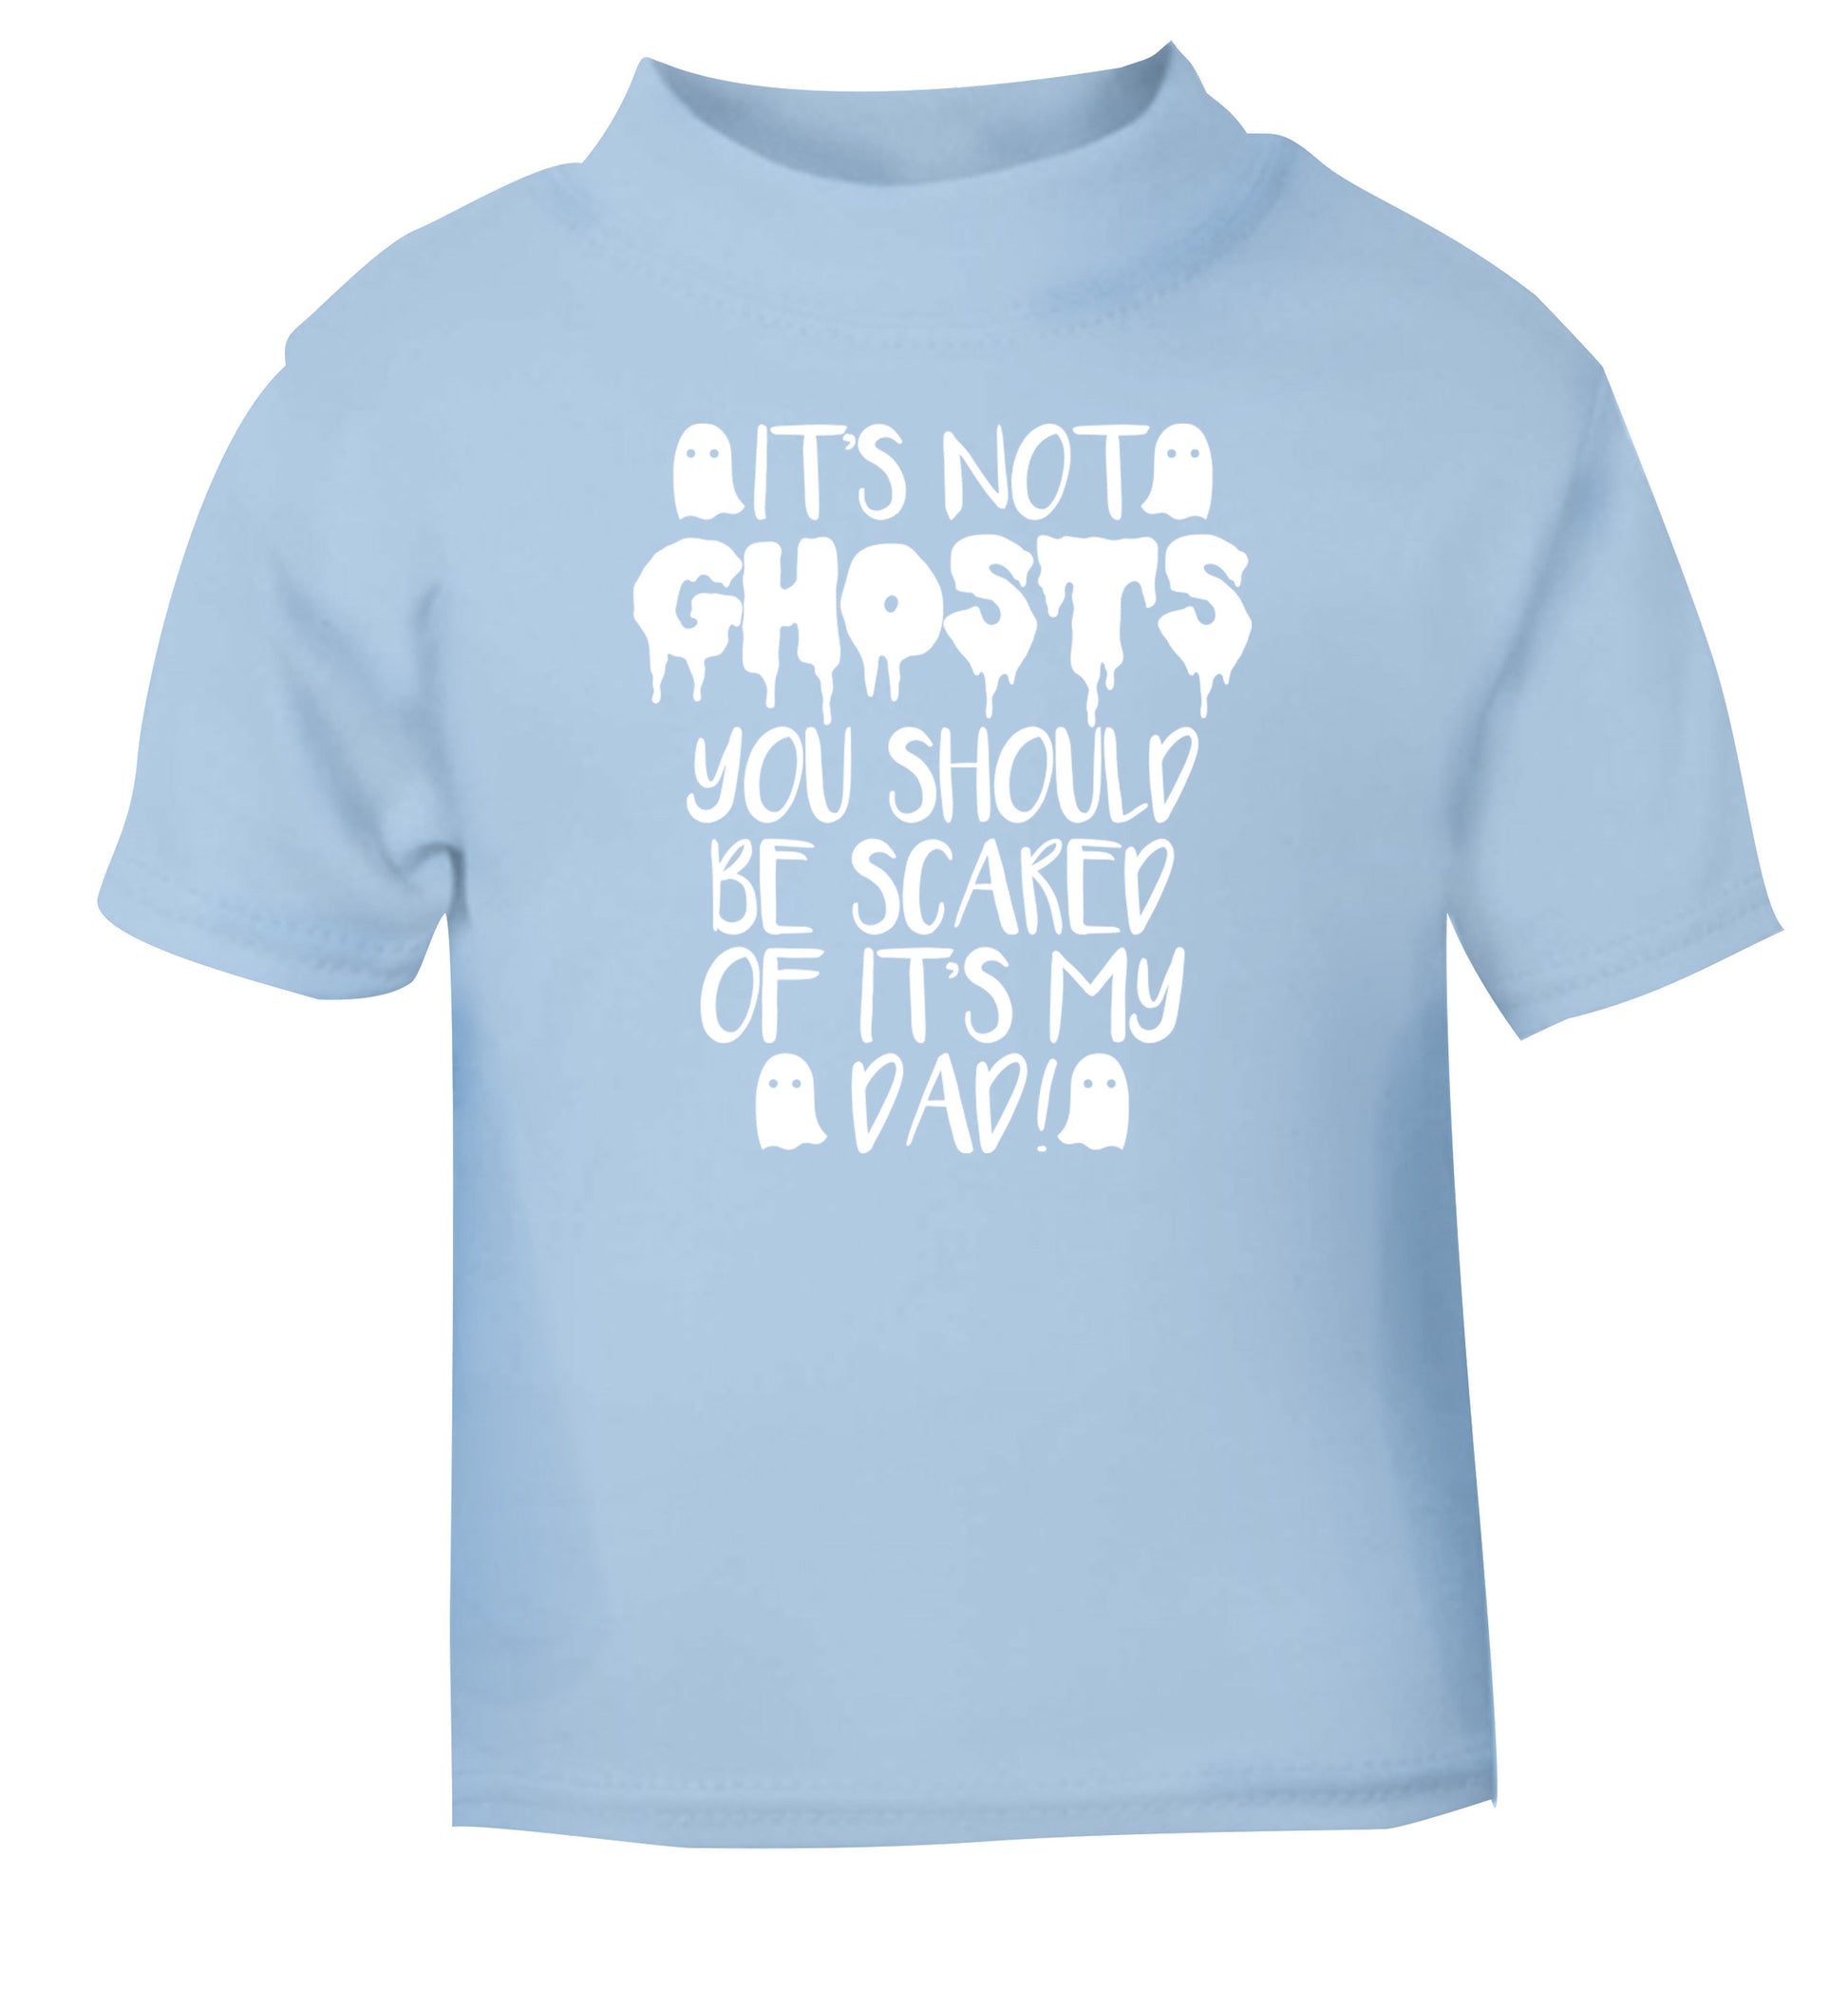 It's not ghosts you should be scared of it's my dad! light blue Baby Toddler Tshirt 2 Years